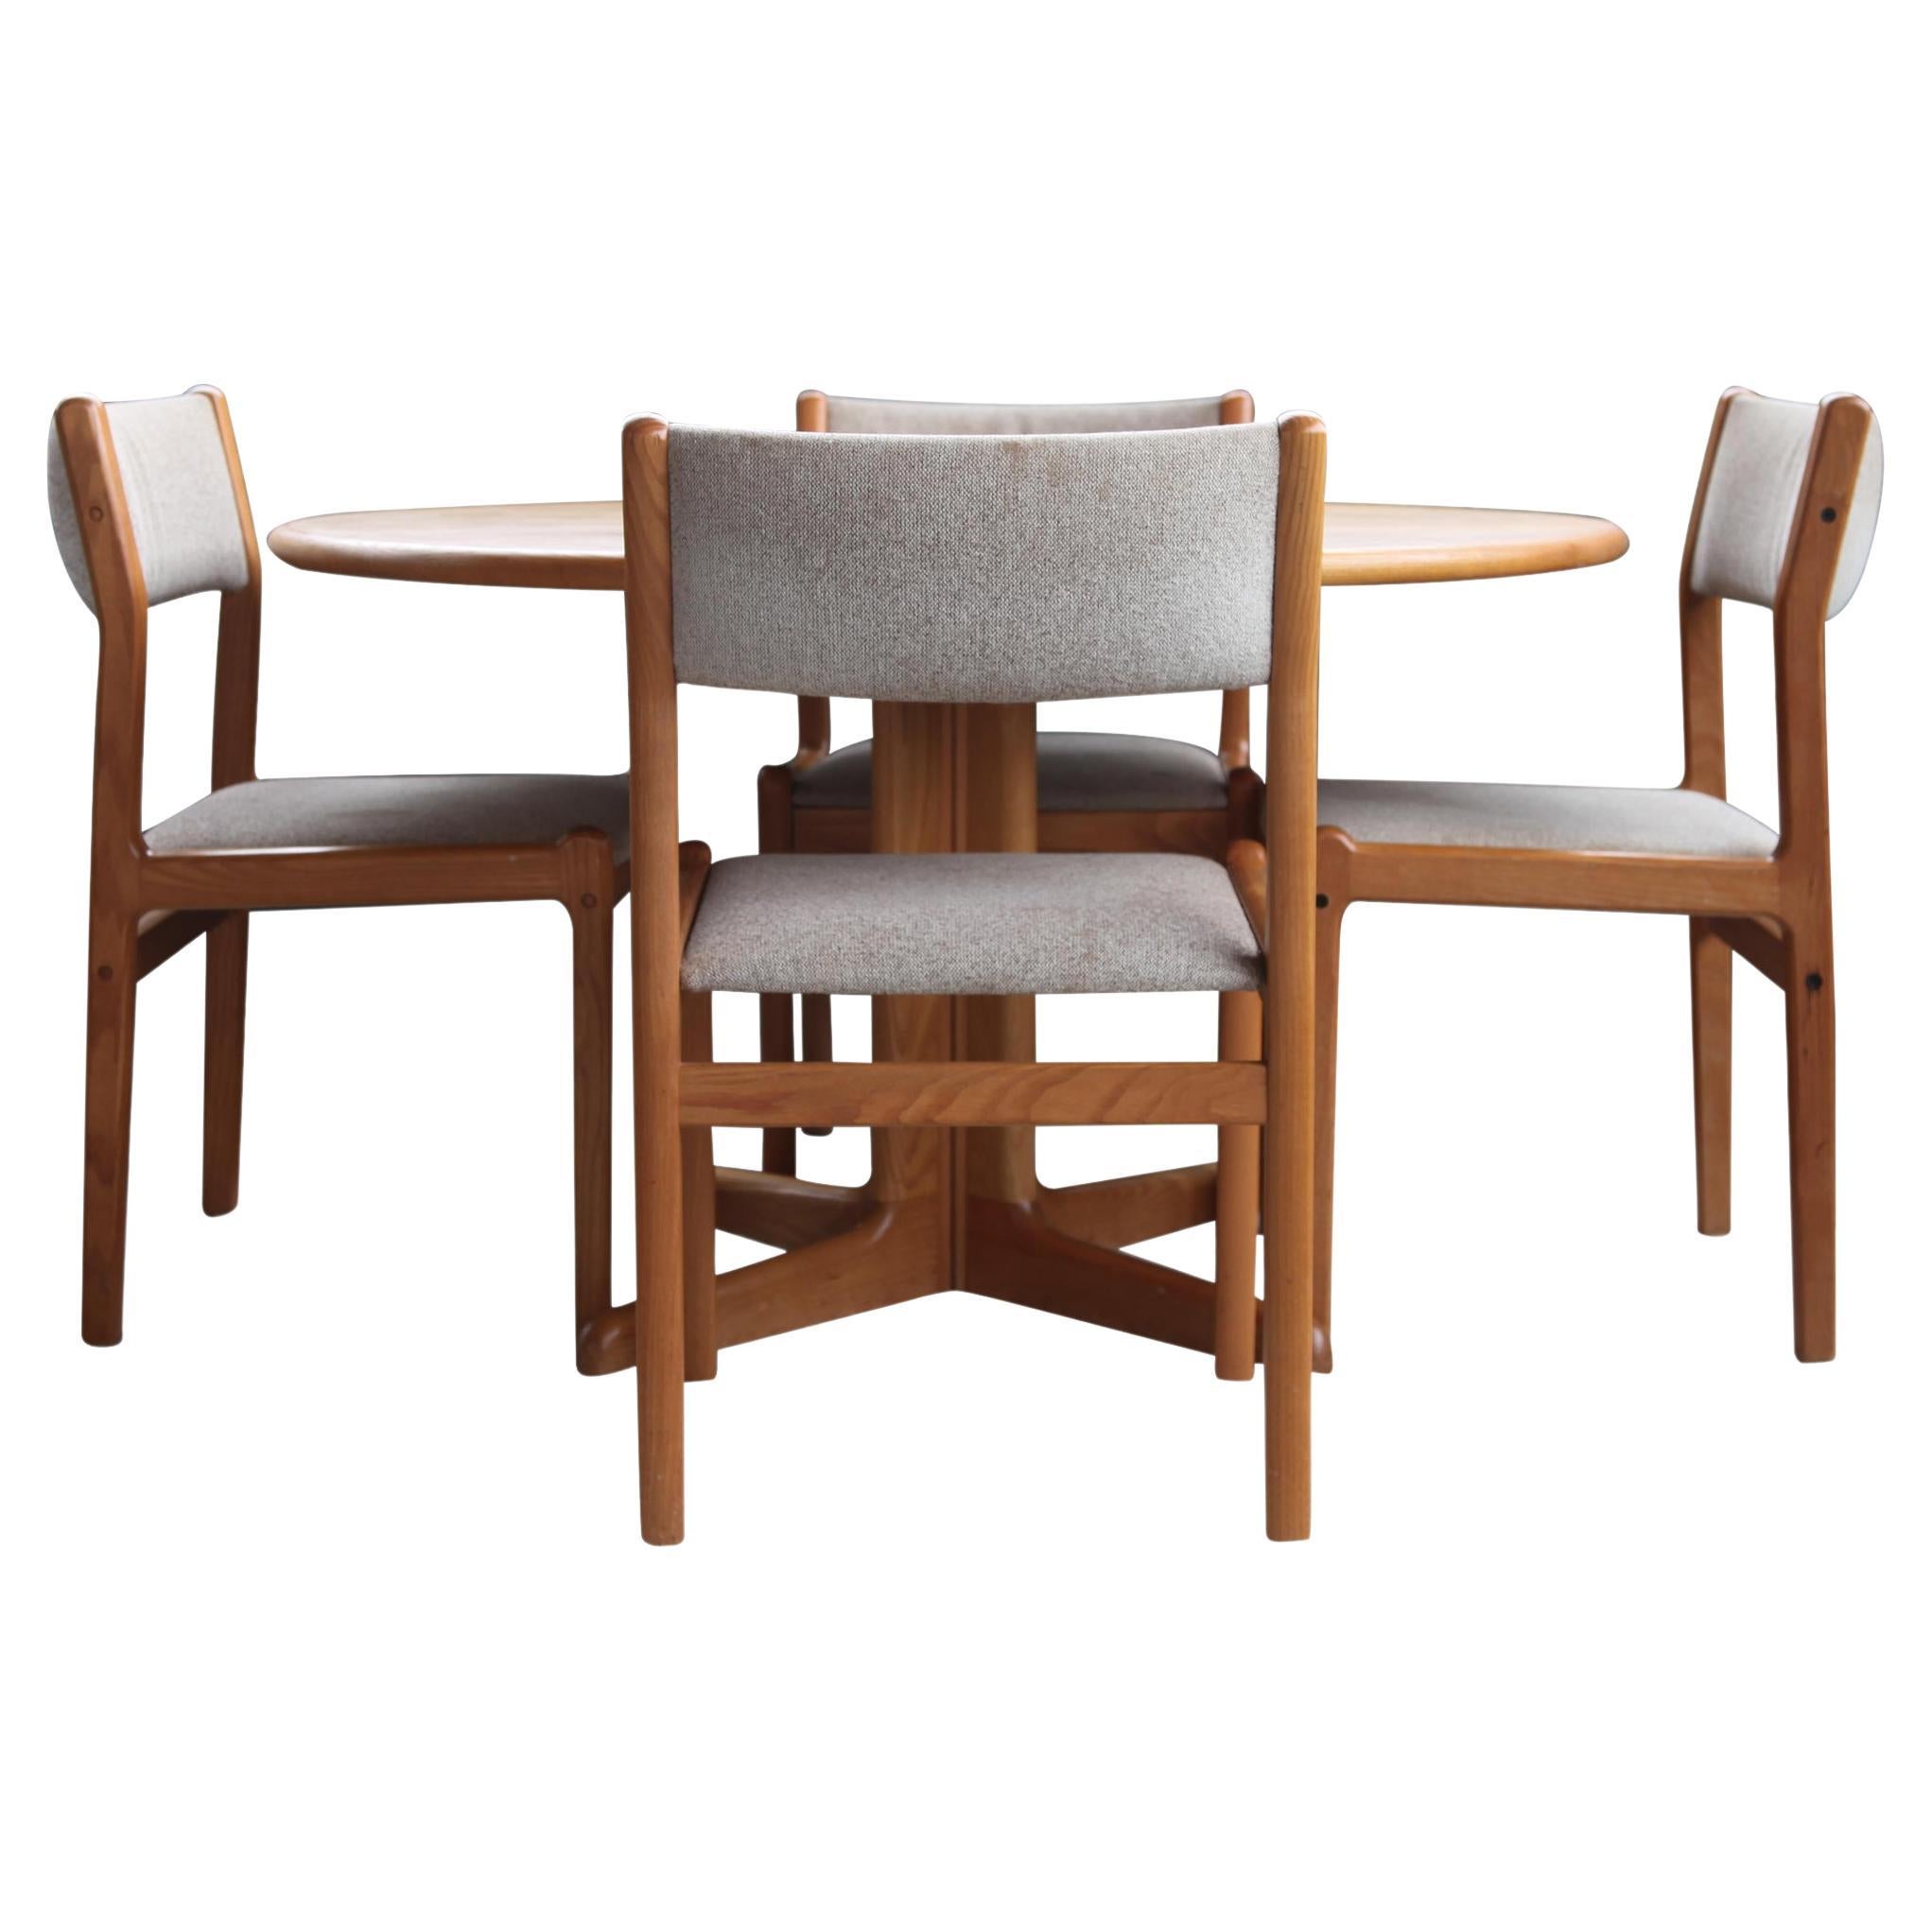 MCM Round to Oval Dining Table w/ Leaves + 4 Chairs by Gudme Jl Moller, 9 Pcs For Sale